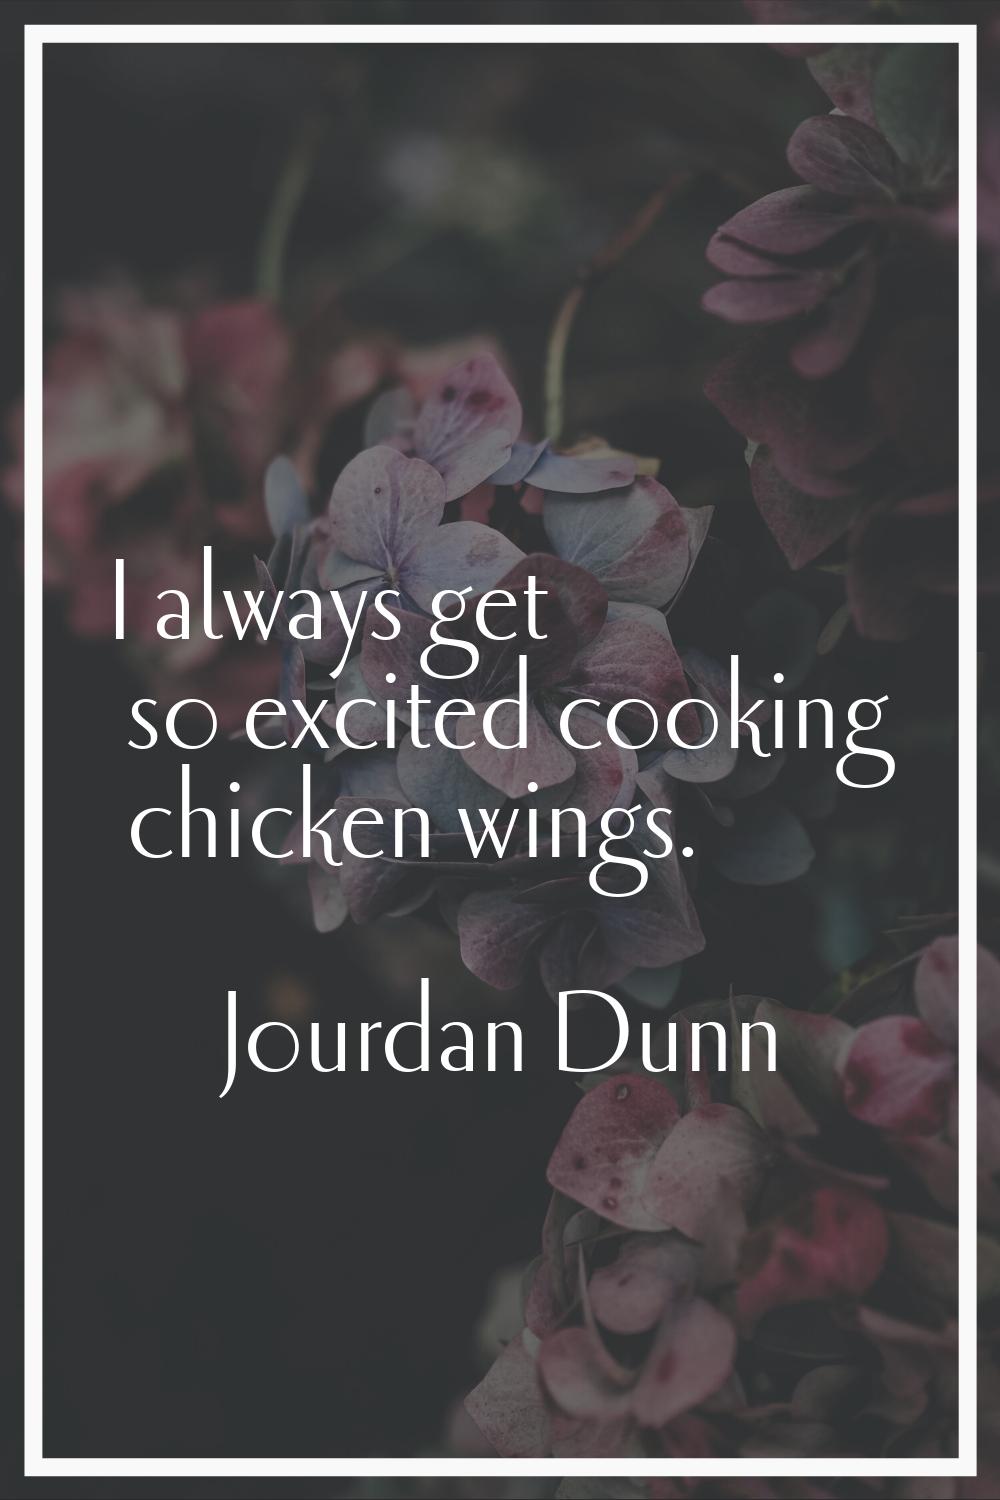 I always get so excited cooking chicken wings.